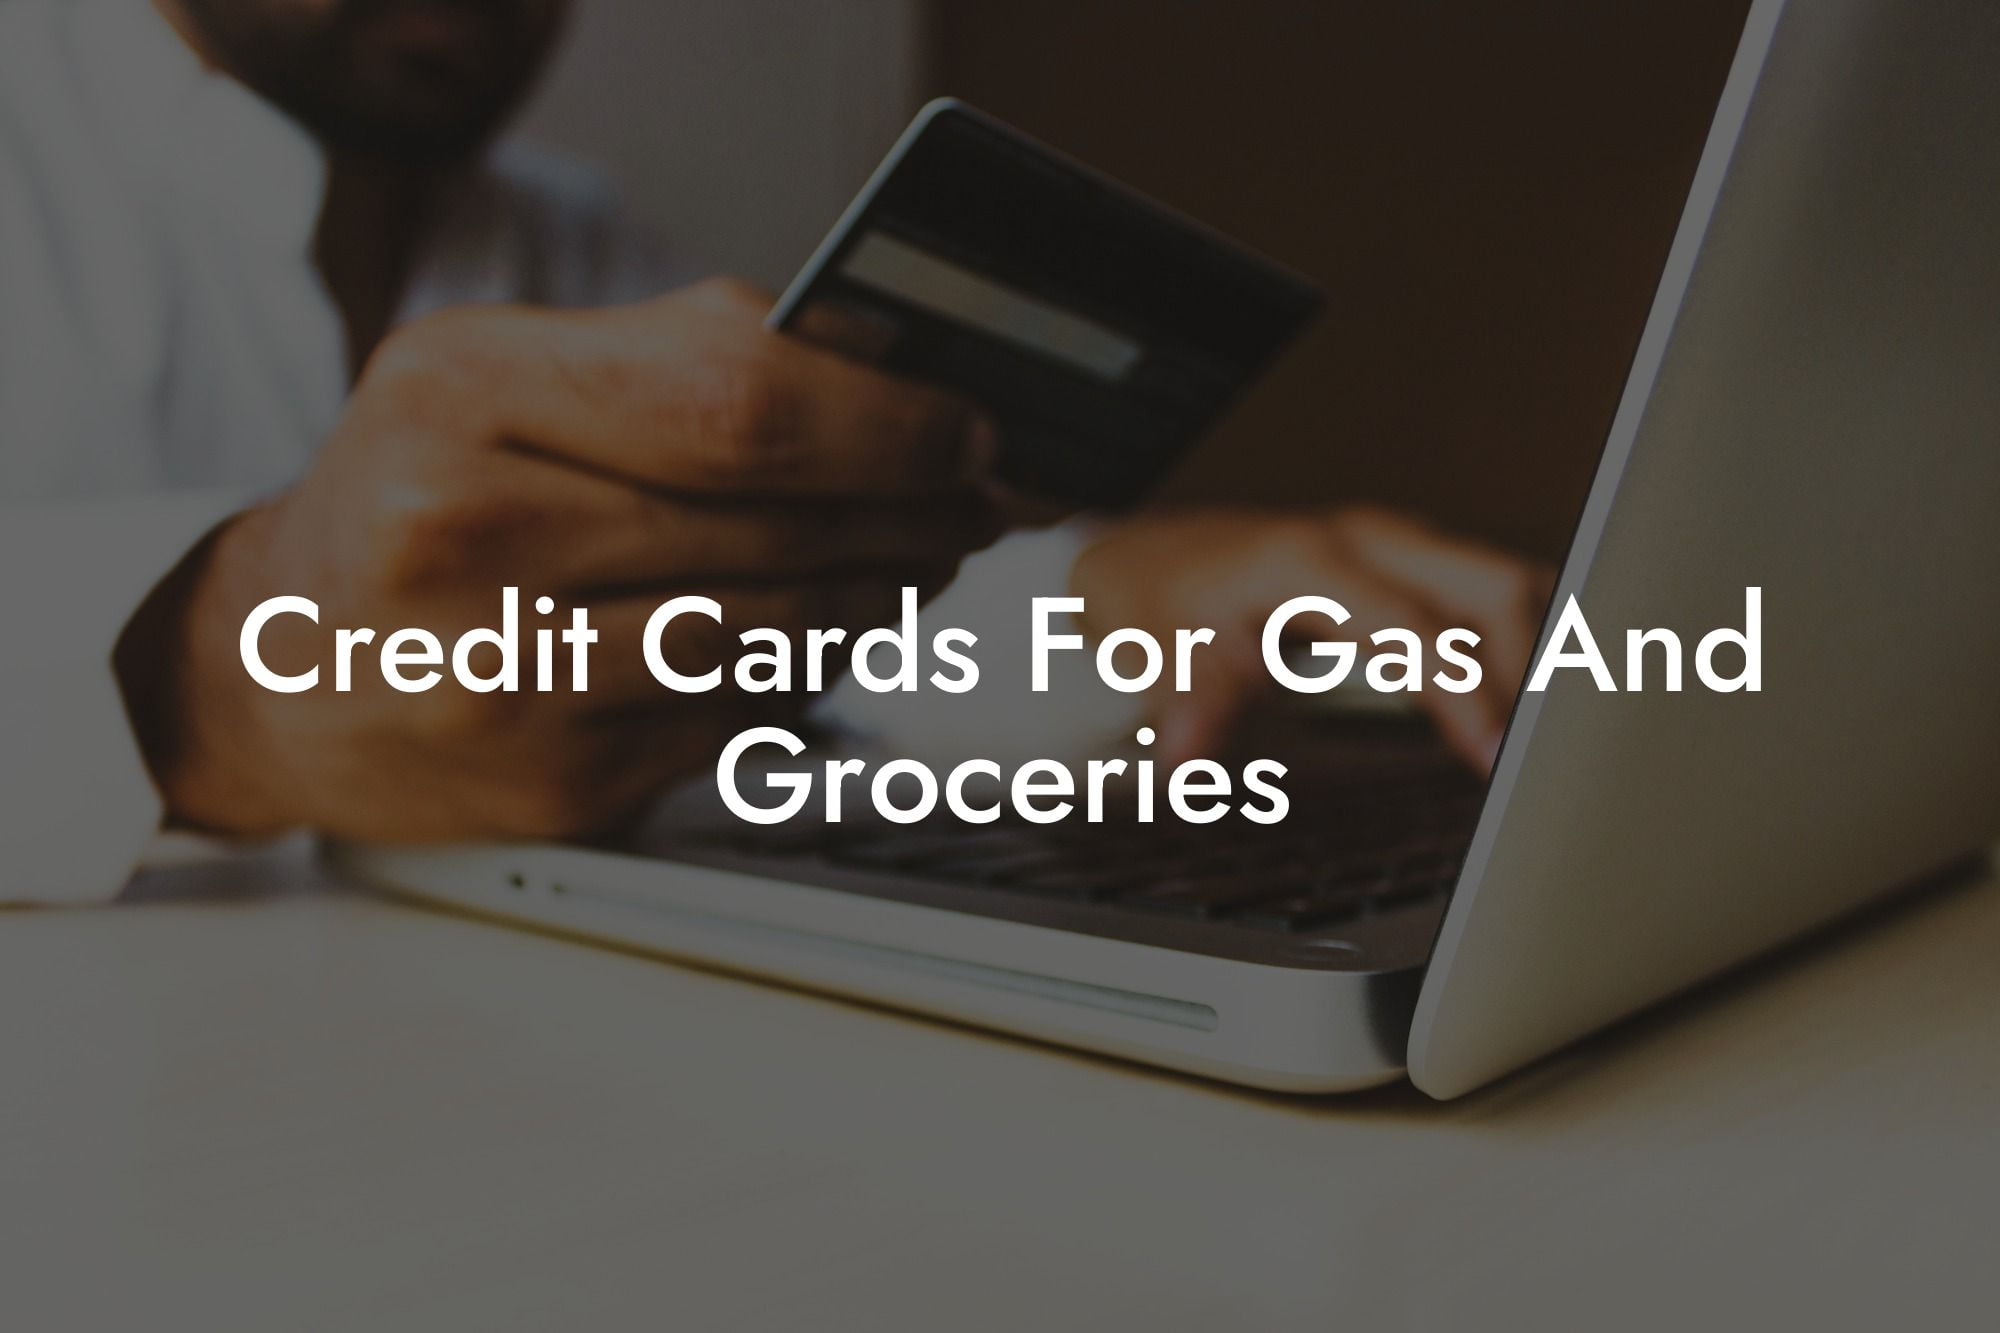 Credit Cards For Gas And Groceries